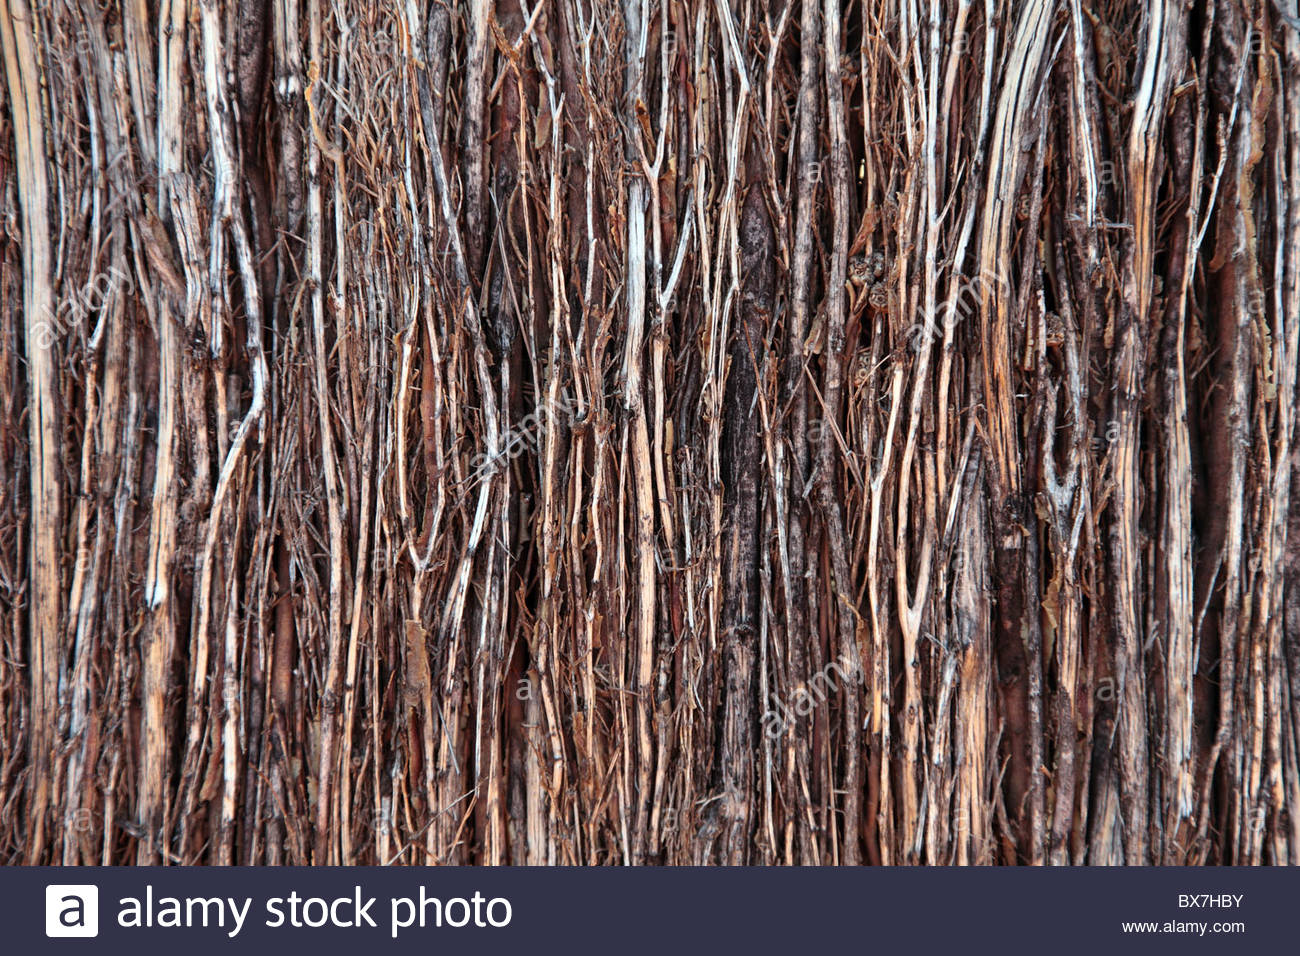 Fence Out Ouf Twigs Background Texture Stock Photo